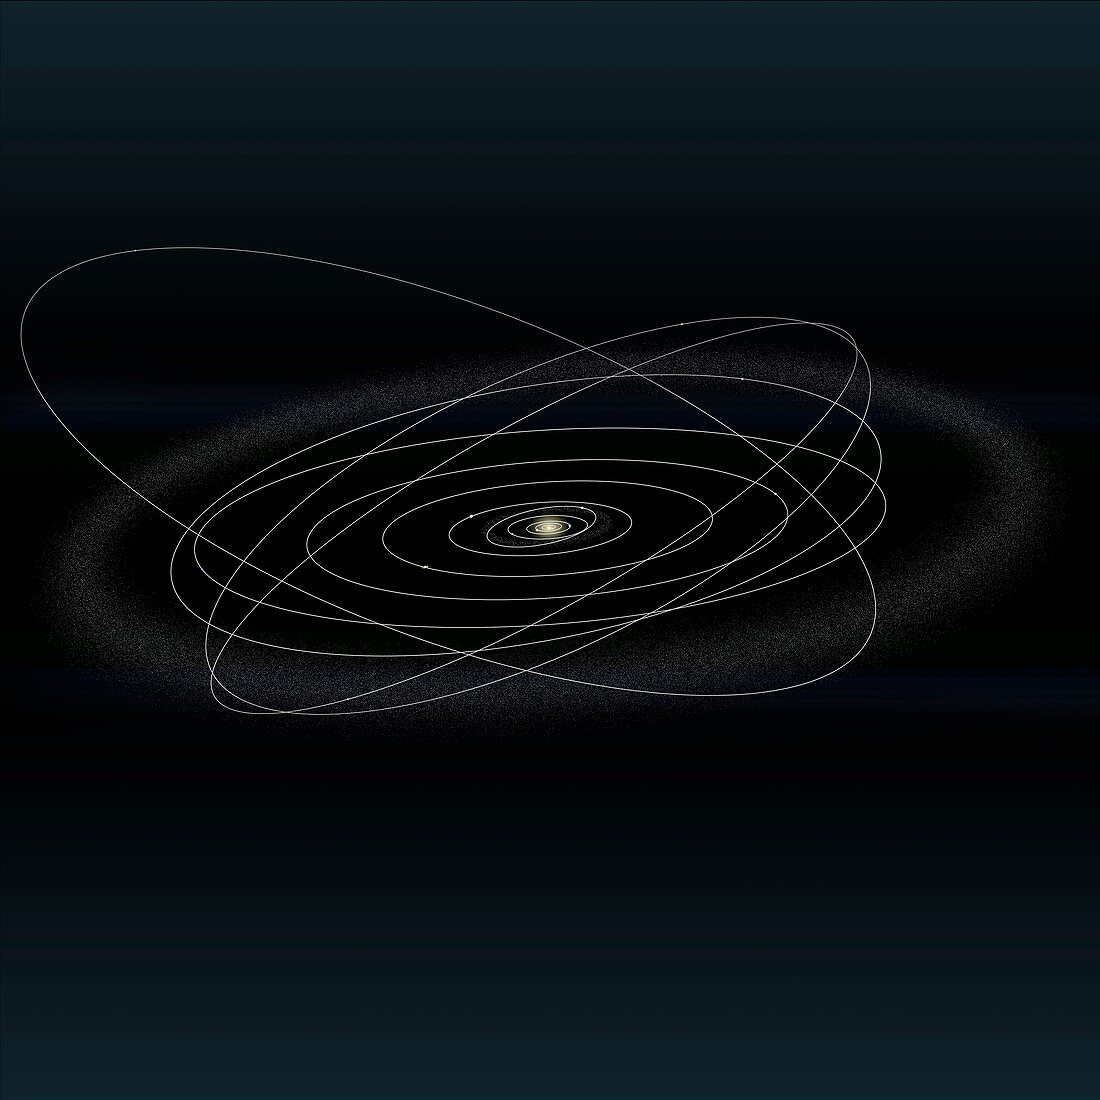 Earth's location in the solar system, illustration